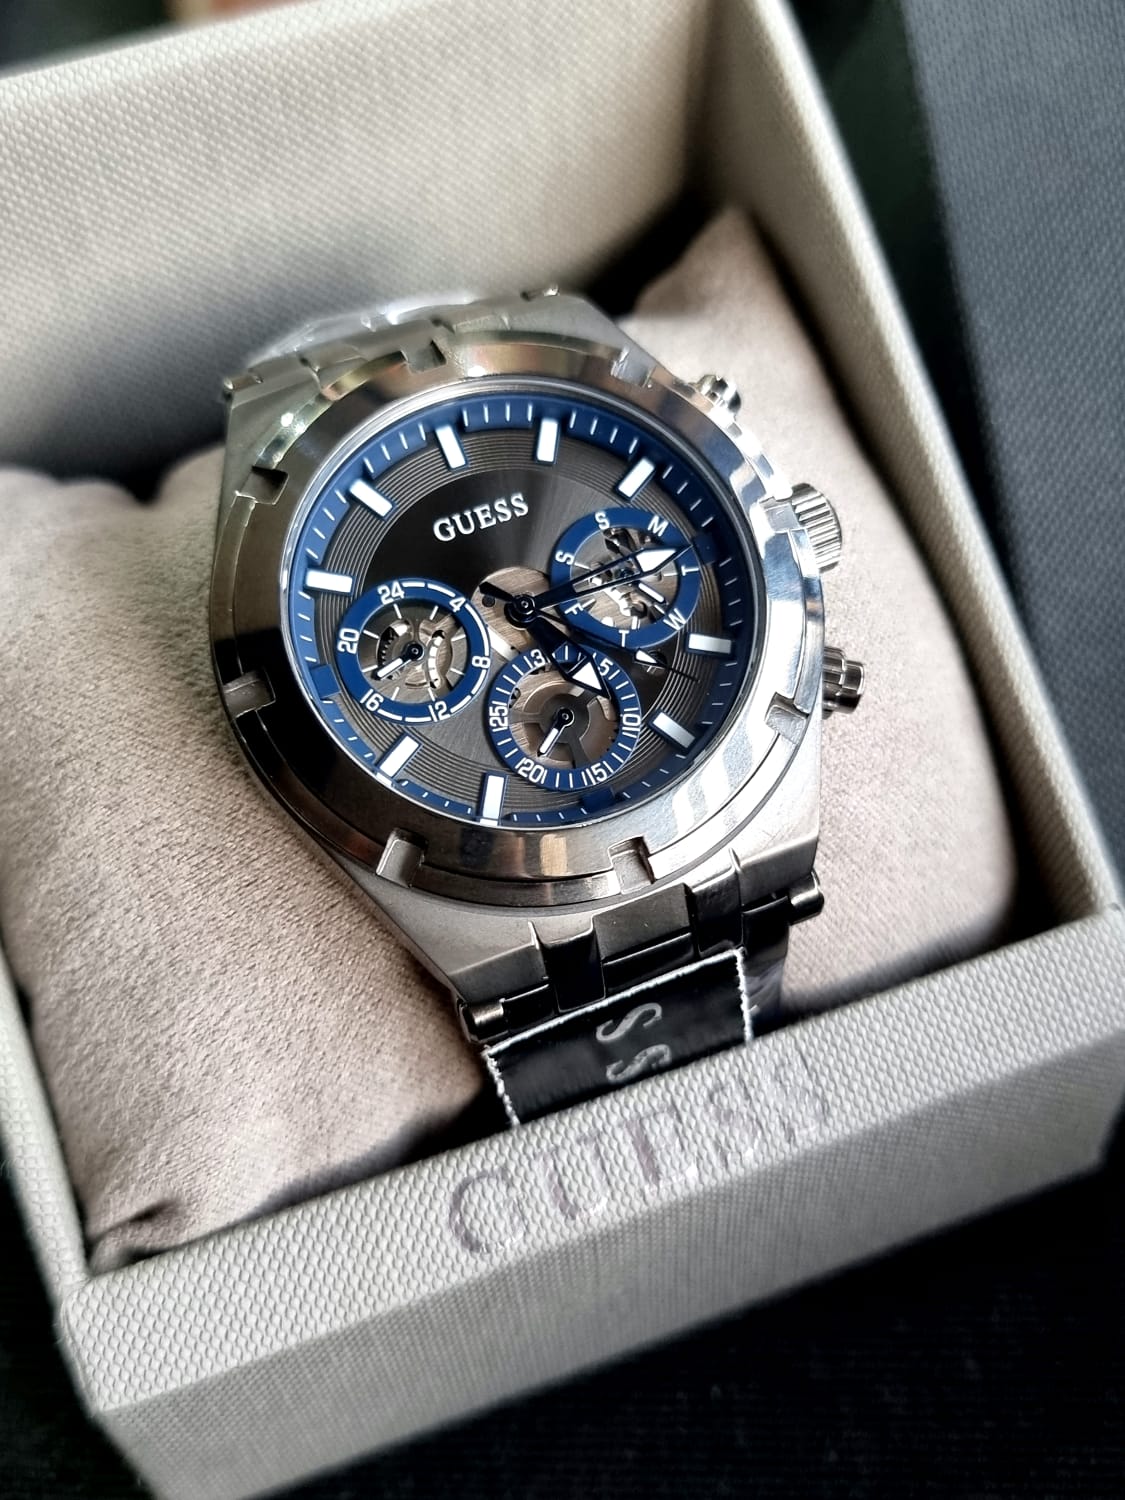 Guess Continental Gunmetal Stainless Steel Grey Dial Chronograph Quartz Watch for Gents – GW0260G3